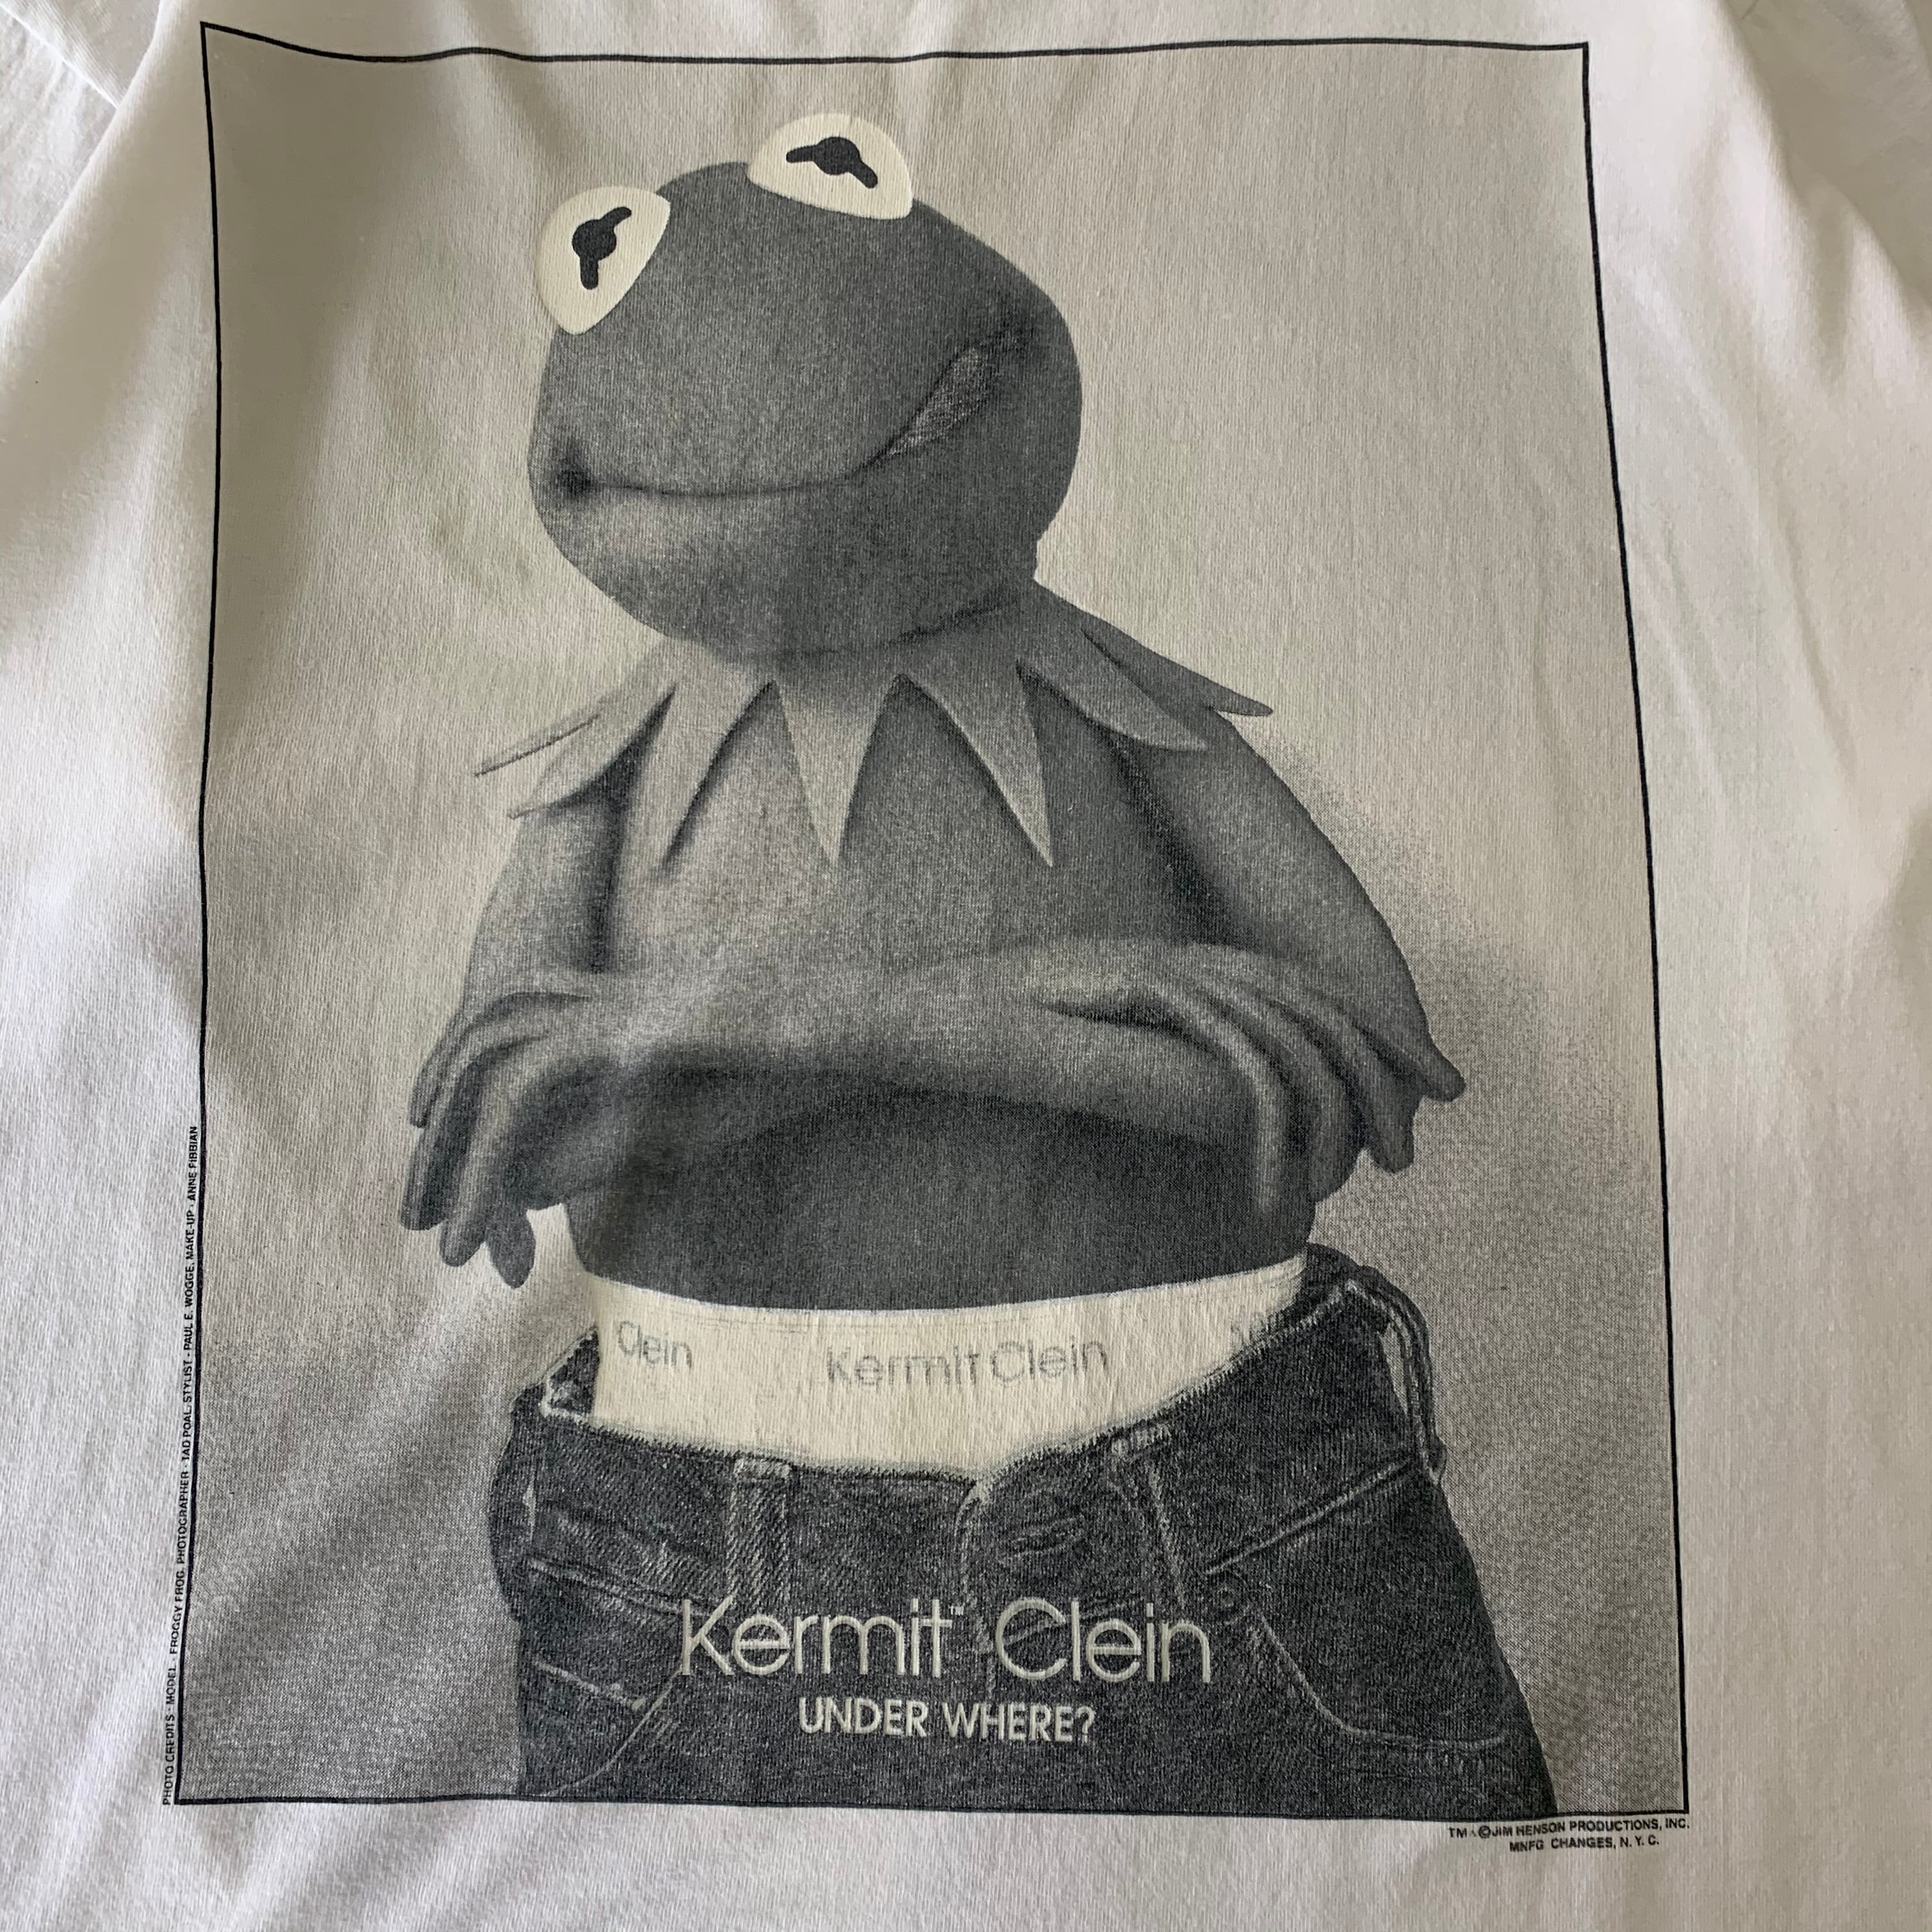 90s Kermit Clein T-shirt | What’z up powered by BASE